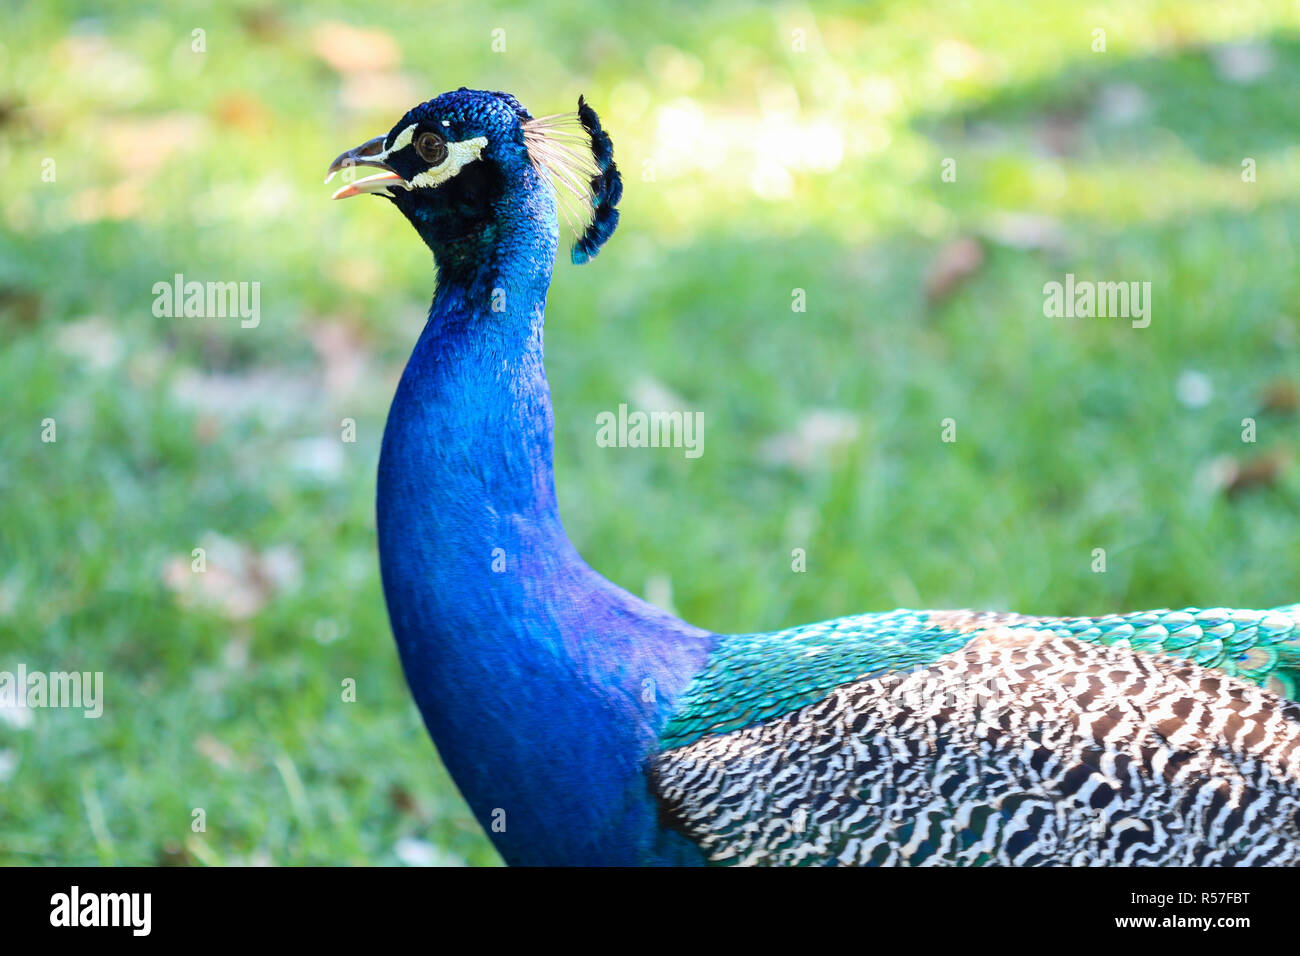 Blue peacock, bird of the Phasianidae family. Their long multicolored feathers are very beautiful, being an exotic bird very used for the removal of f Stock Photo